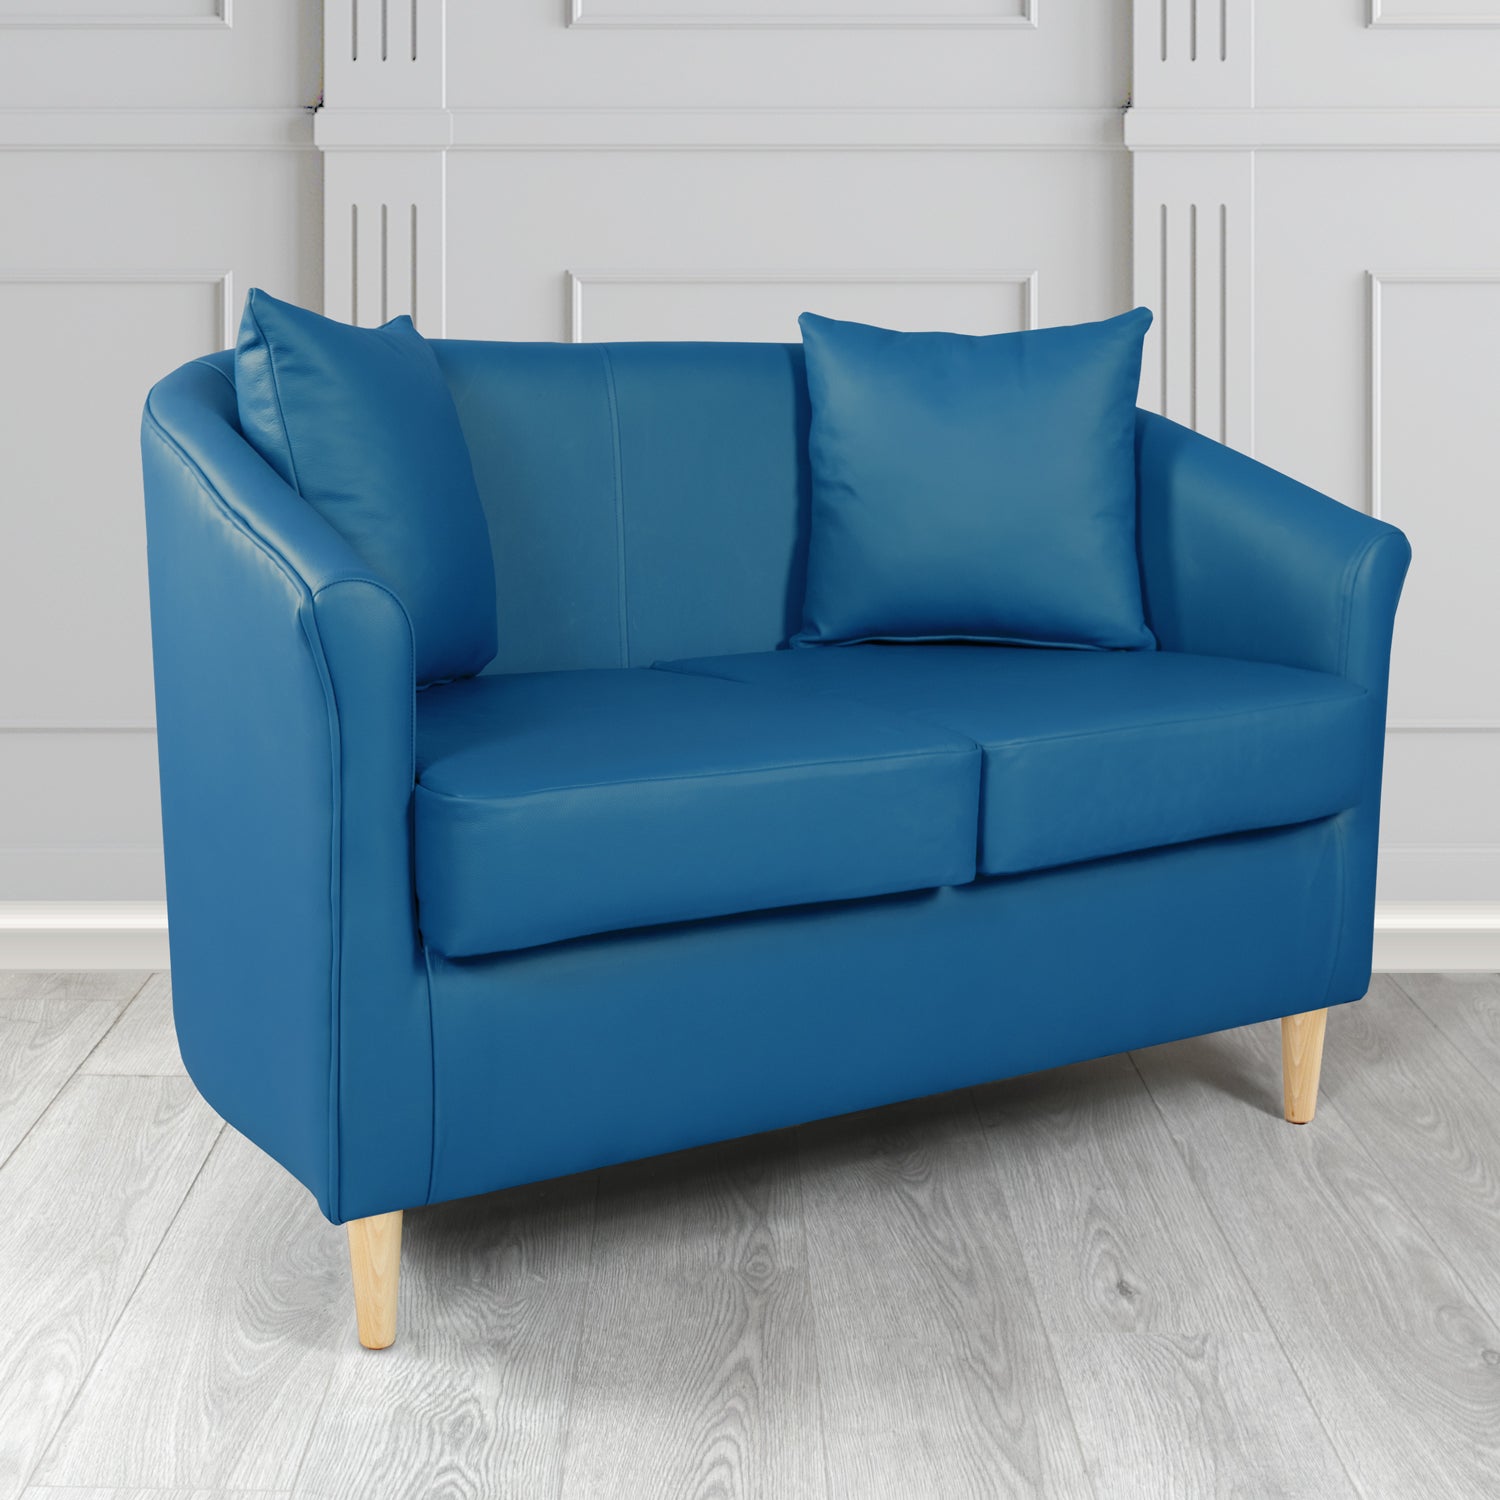 St Tropez 2 Seater Tub Sofa in Madrid Royal Faux Leather - The Tub Chair Shop